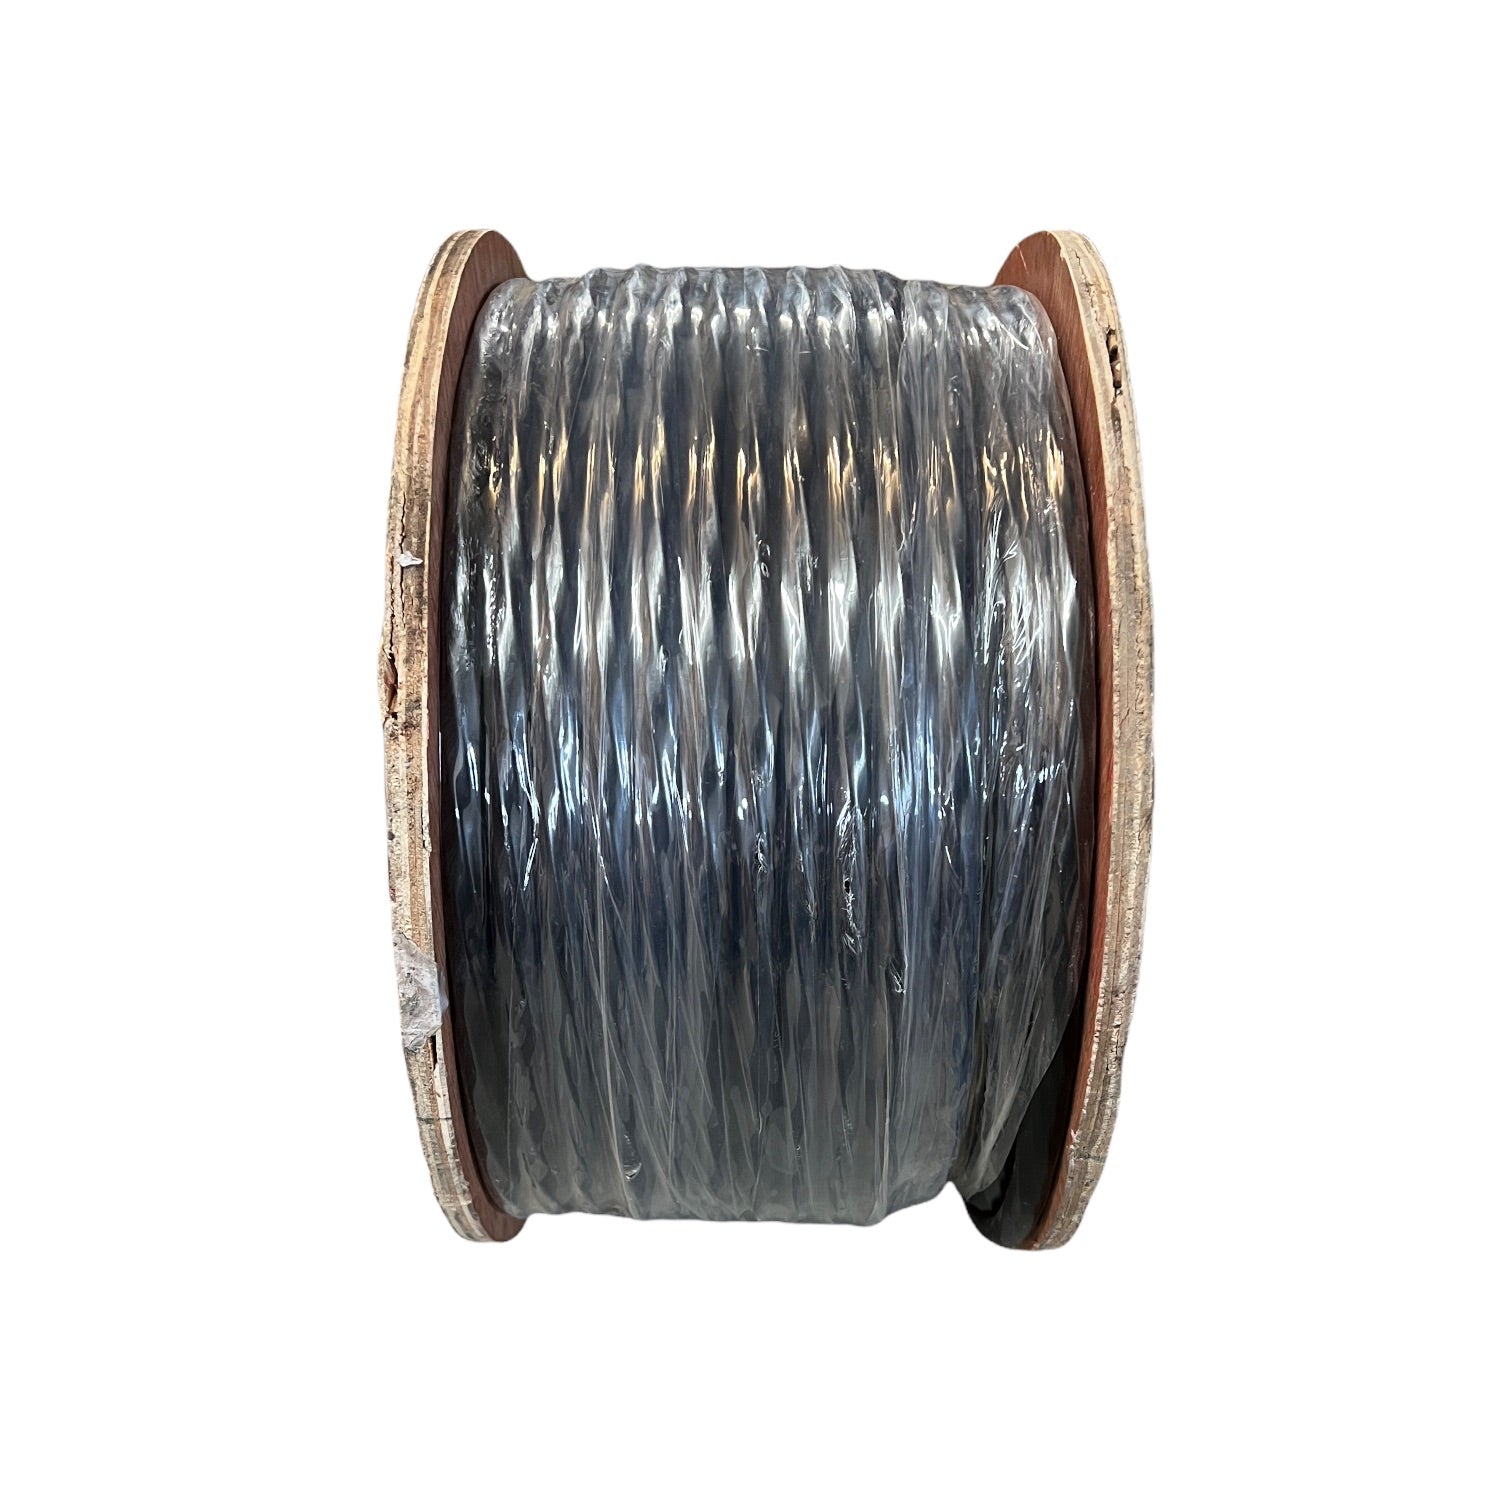 18/9X250 - Multi-Conductor Irrigation Control Wire, 18 awg, 18/9 X 250 ft